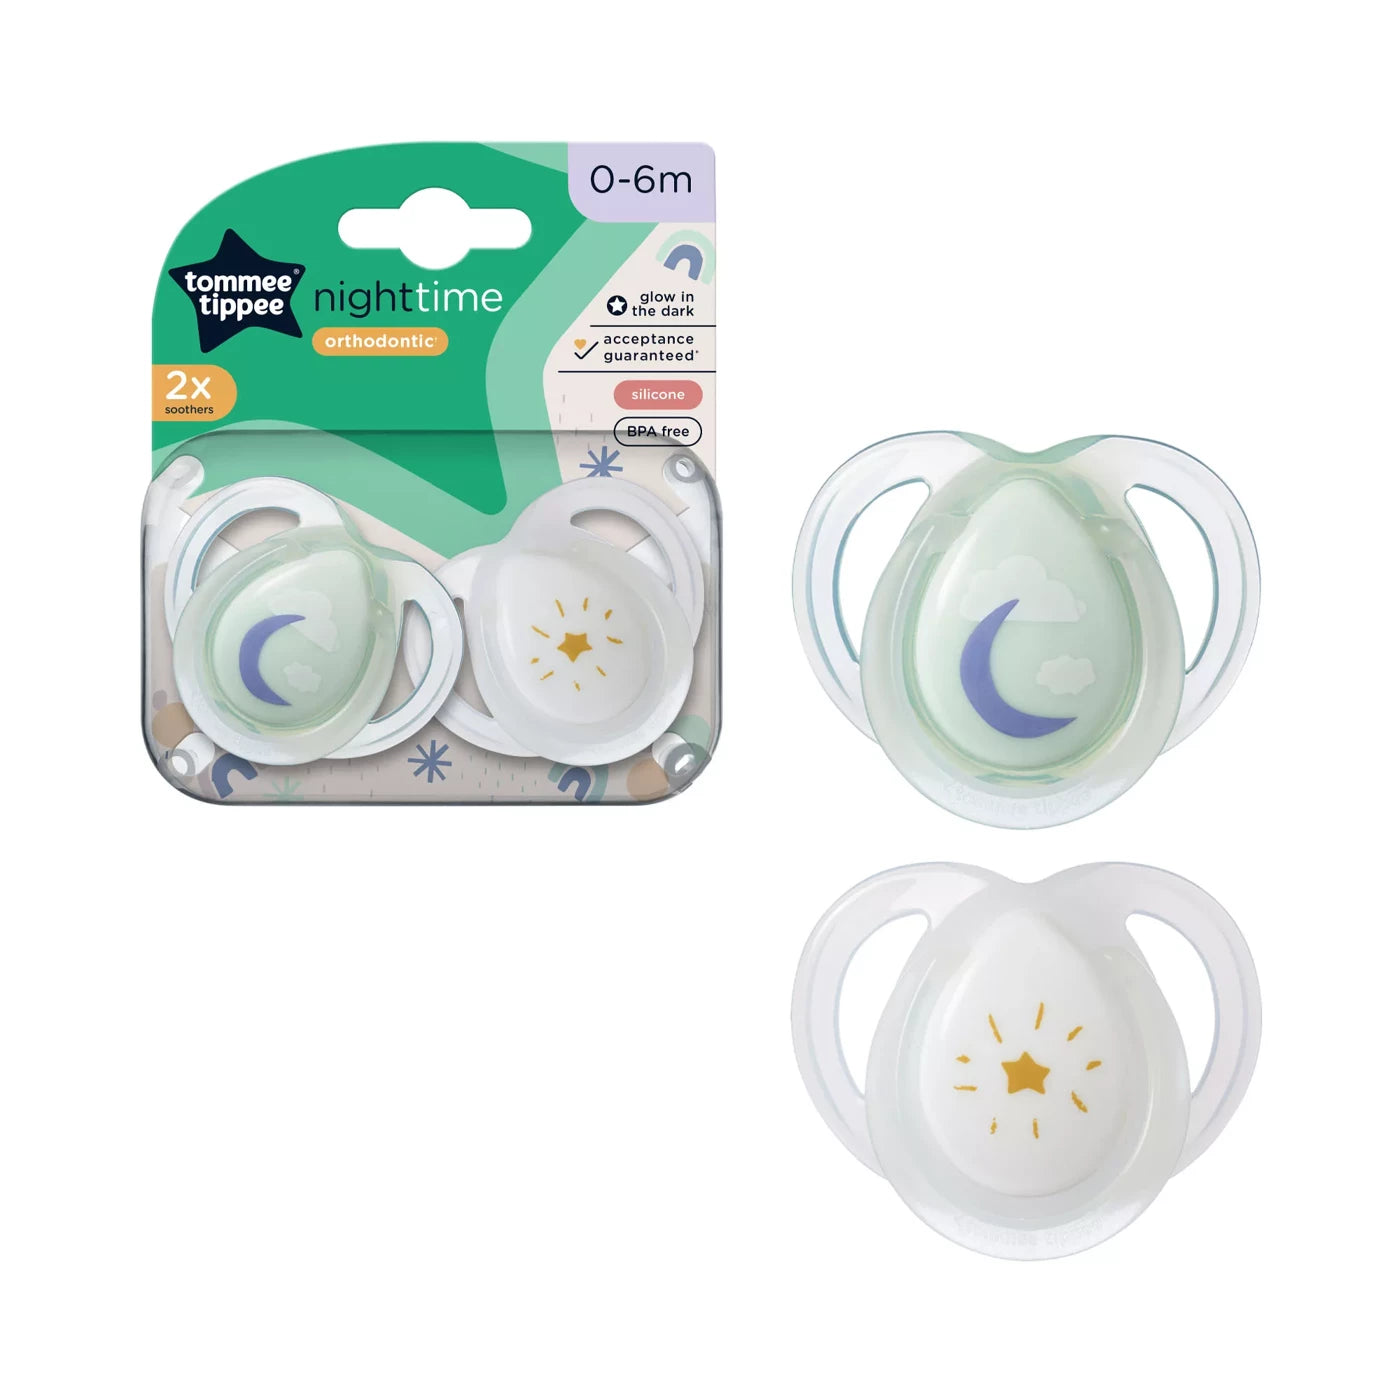 Baby Soothers Tommee Tippee night time soothers for baby, 0- 6 months - 2 pack - Glow in the Dark $8.80